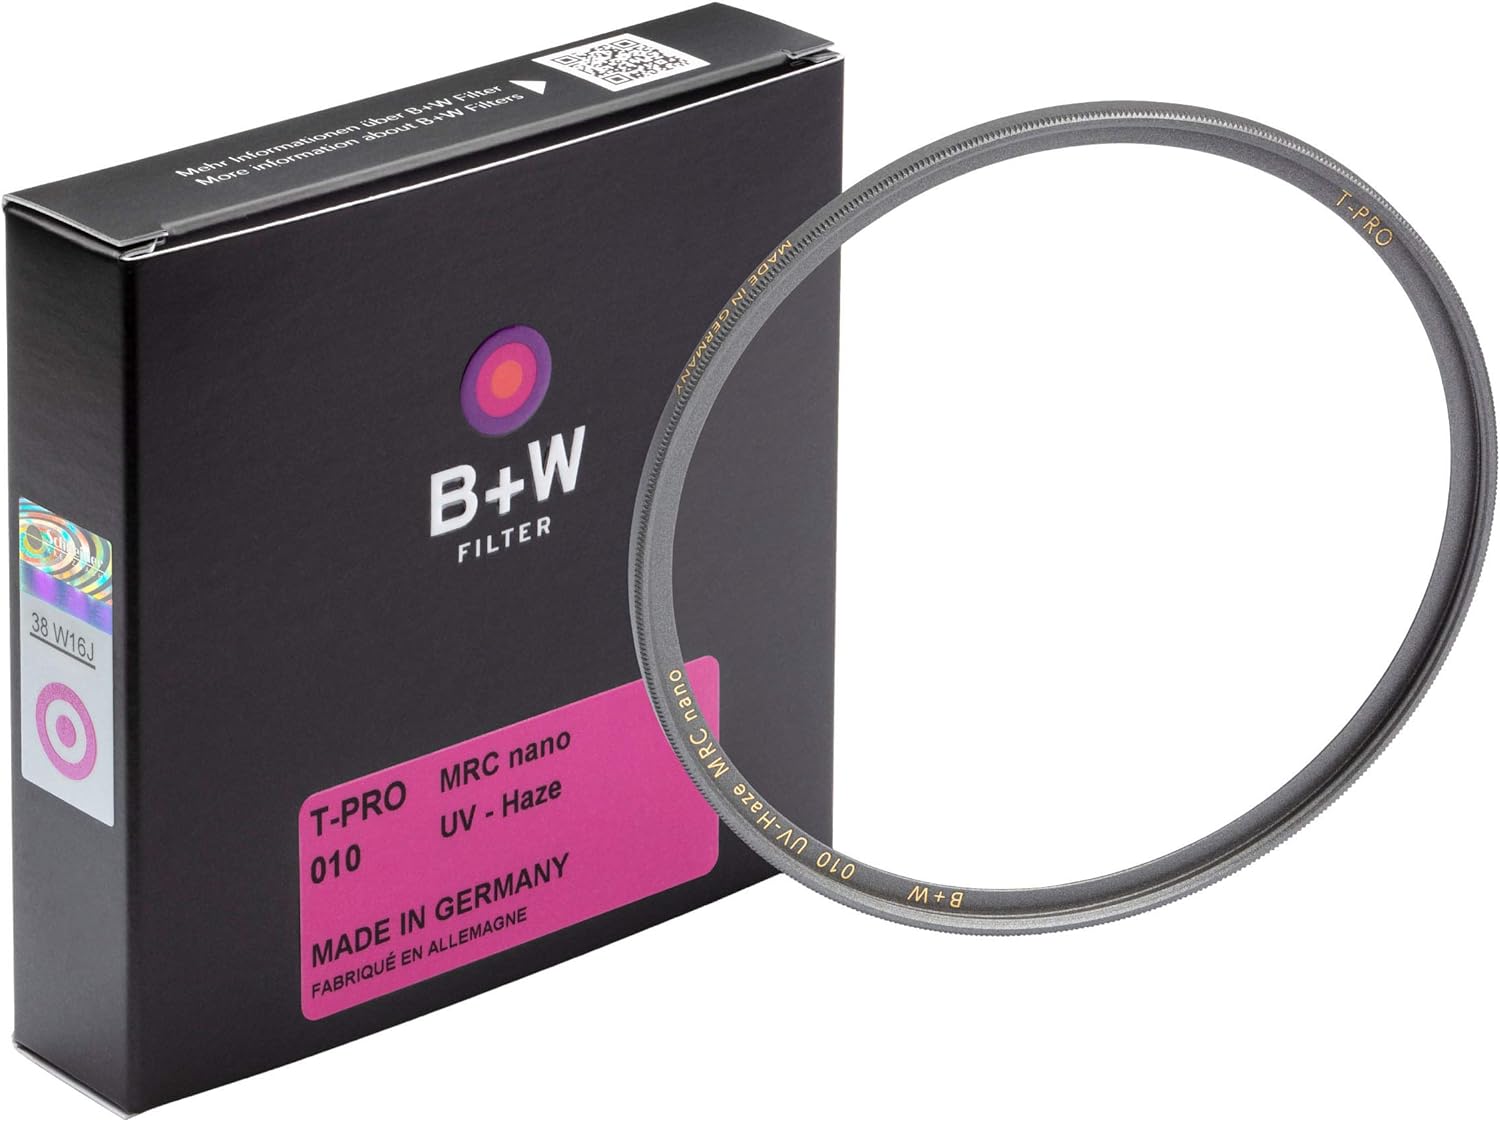 B + W UV-Haze Protection Filter for Camera Lens – Ultra Slim Titan Mount (T-PRO), 010, HTC, 16 Layers Multi-Resistant and Nano Coating, Photography Filter, 37 mm